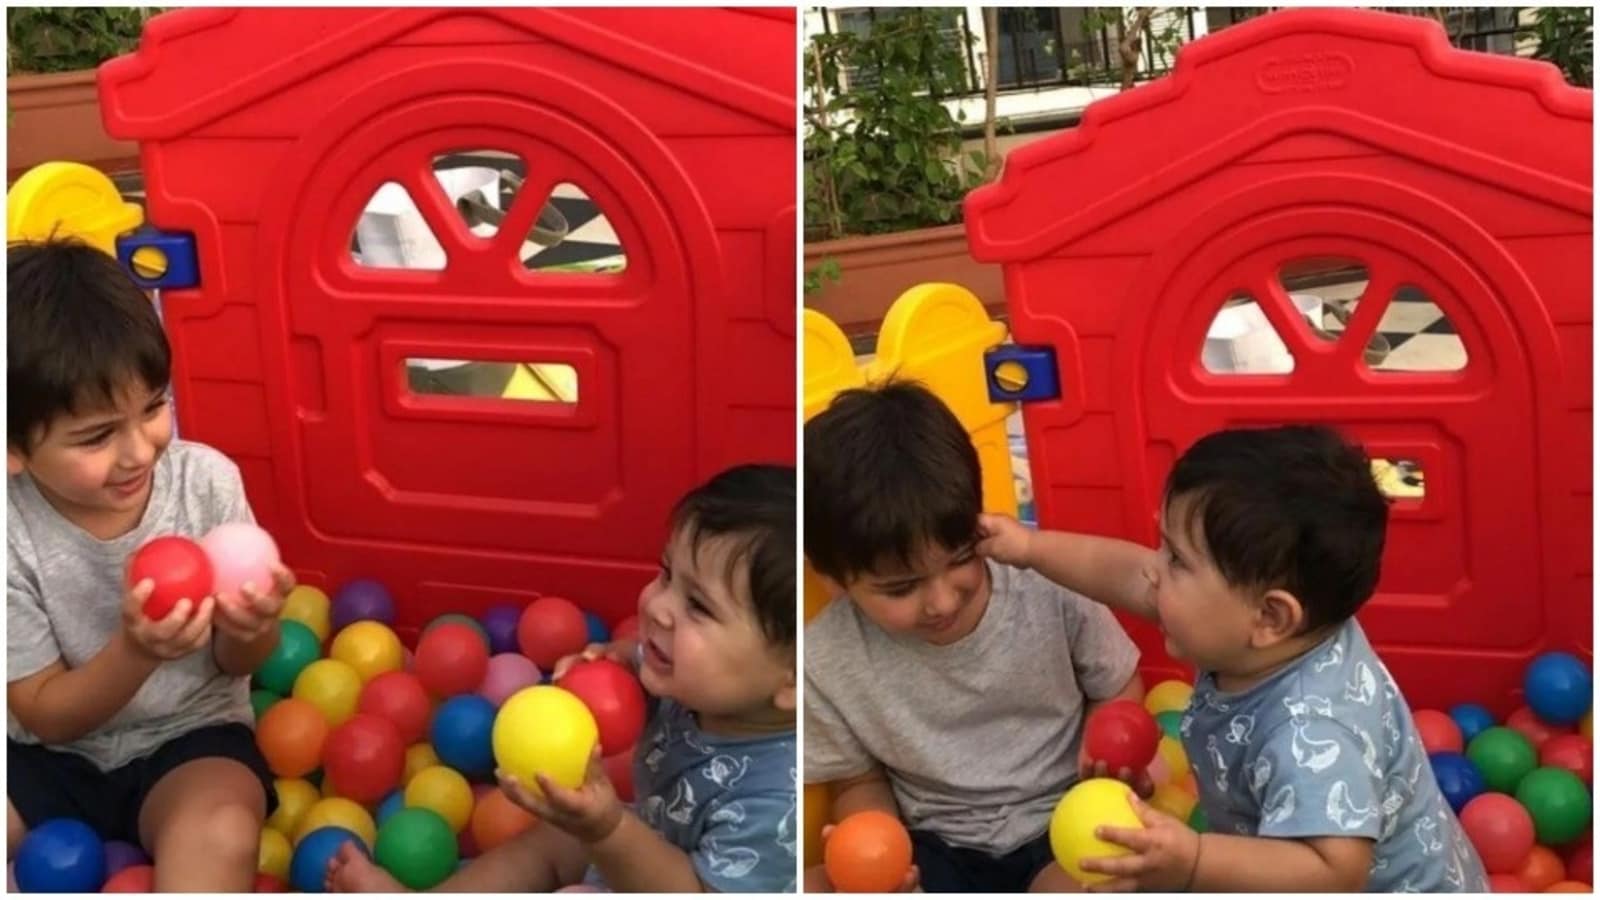 Taimur Ali Khan, brother Jehangir Ali Khan play together in pics posted by Saba